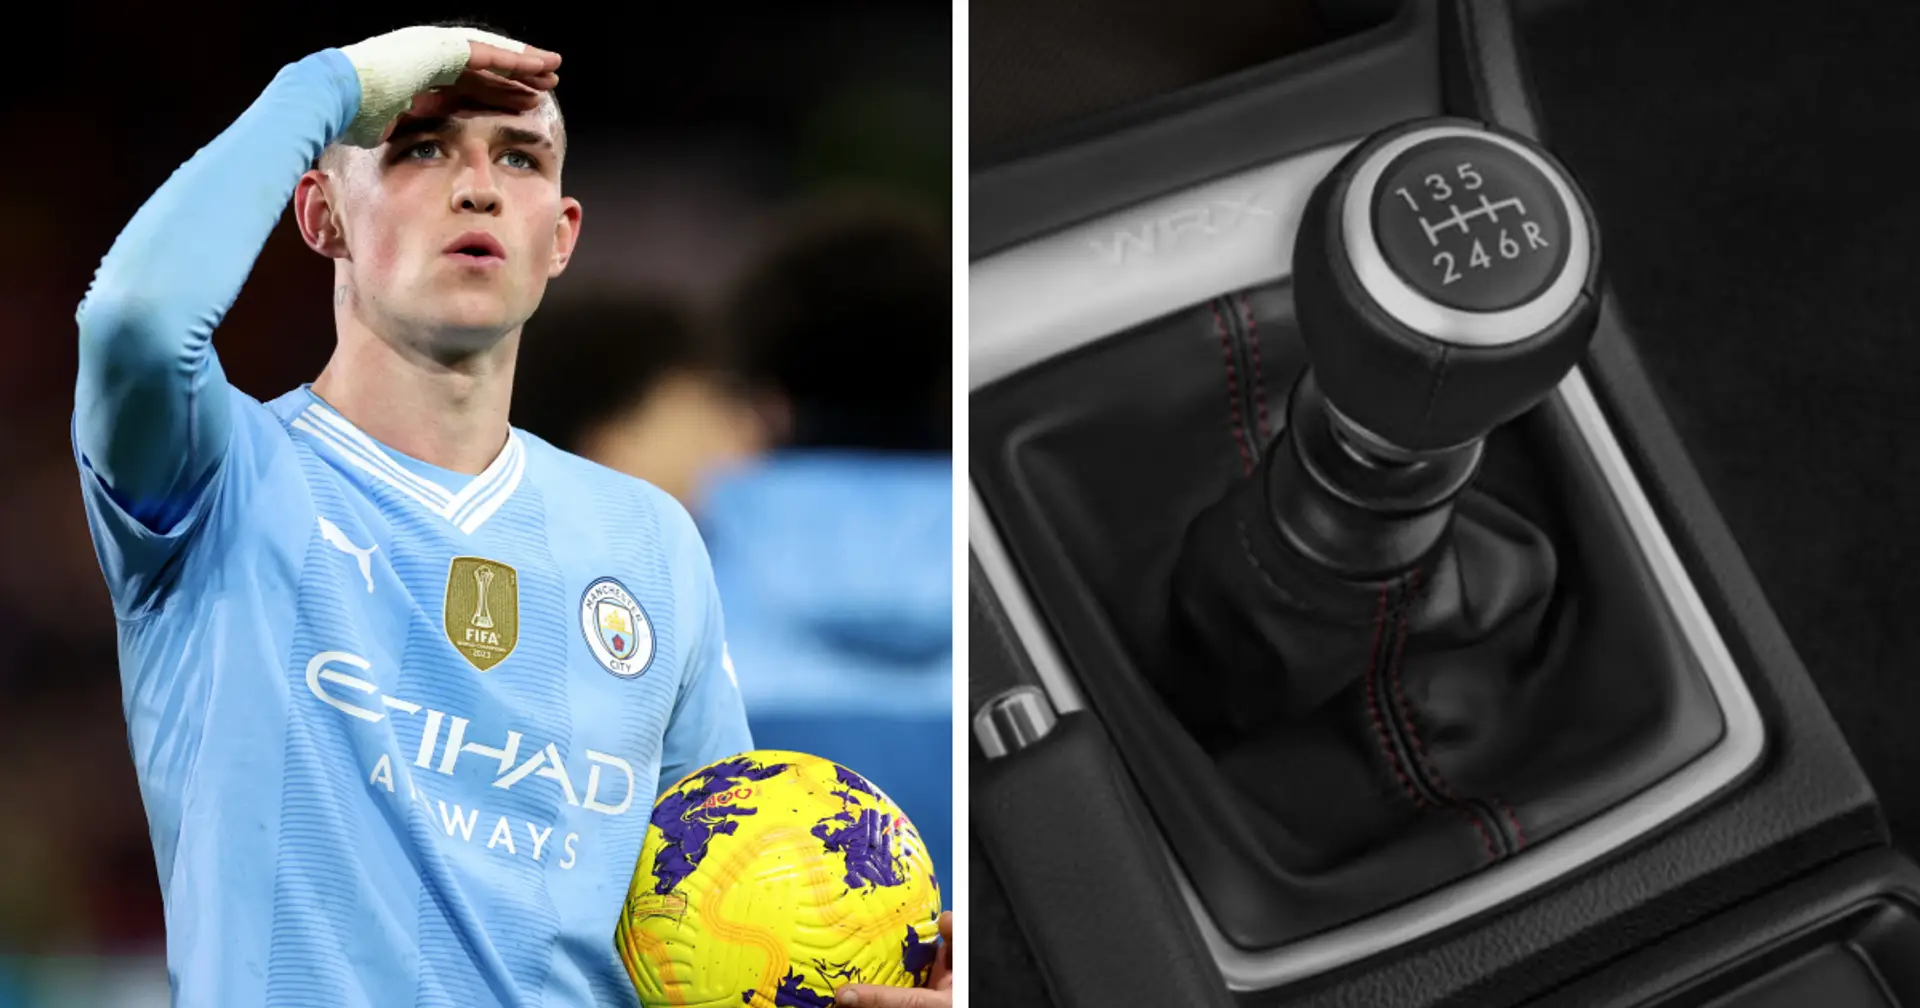 'Phil has a sixth gear': Pep Guardiola explains how Foden can get better with an interesting analogy